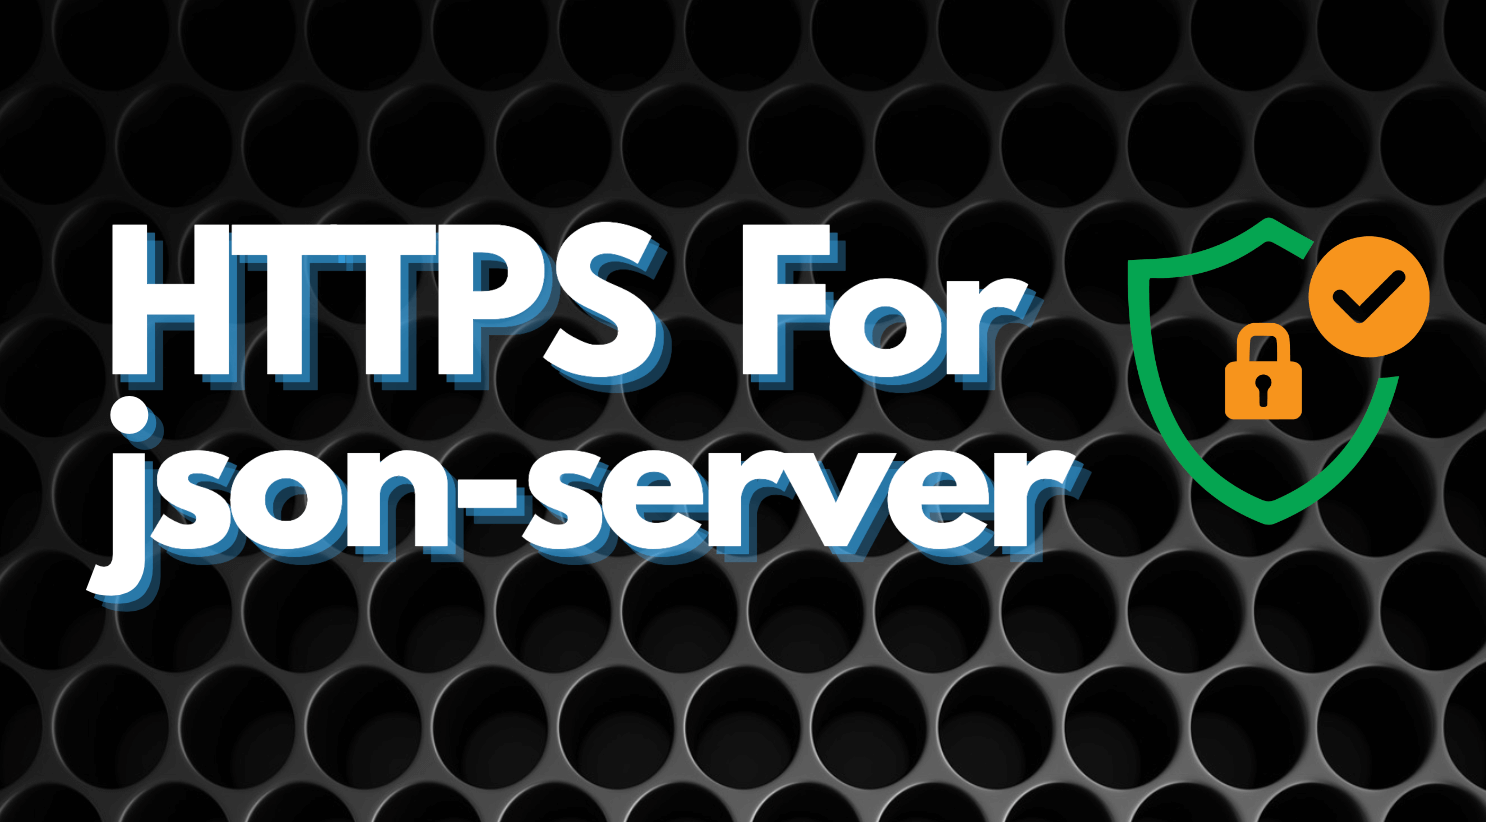 Is your browser flagging non-secure requests? Want json-server up and running on HTTPS? Let's dive into how you can fix this issue and keep your development journey smooth and secure.